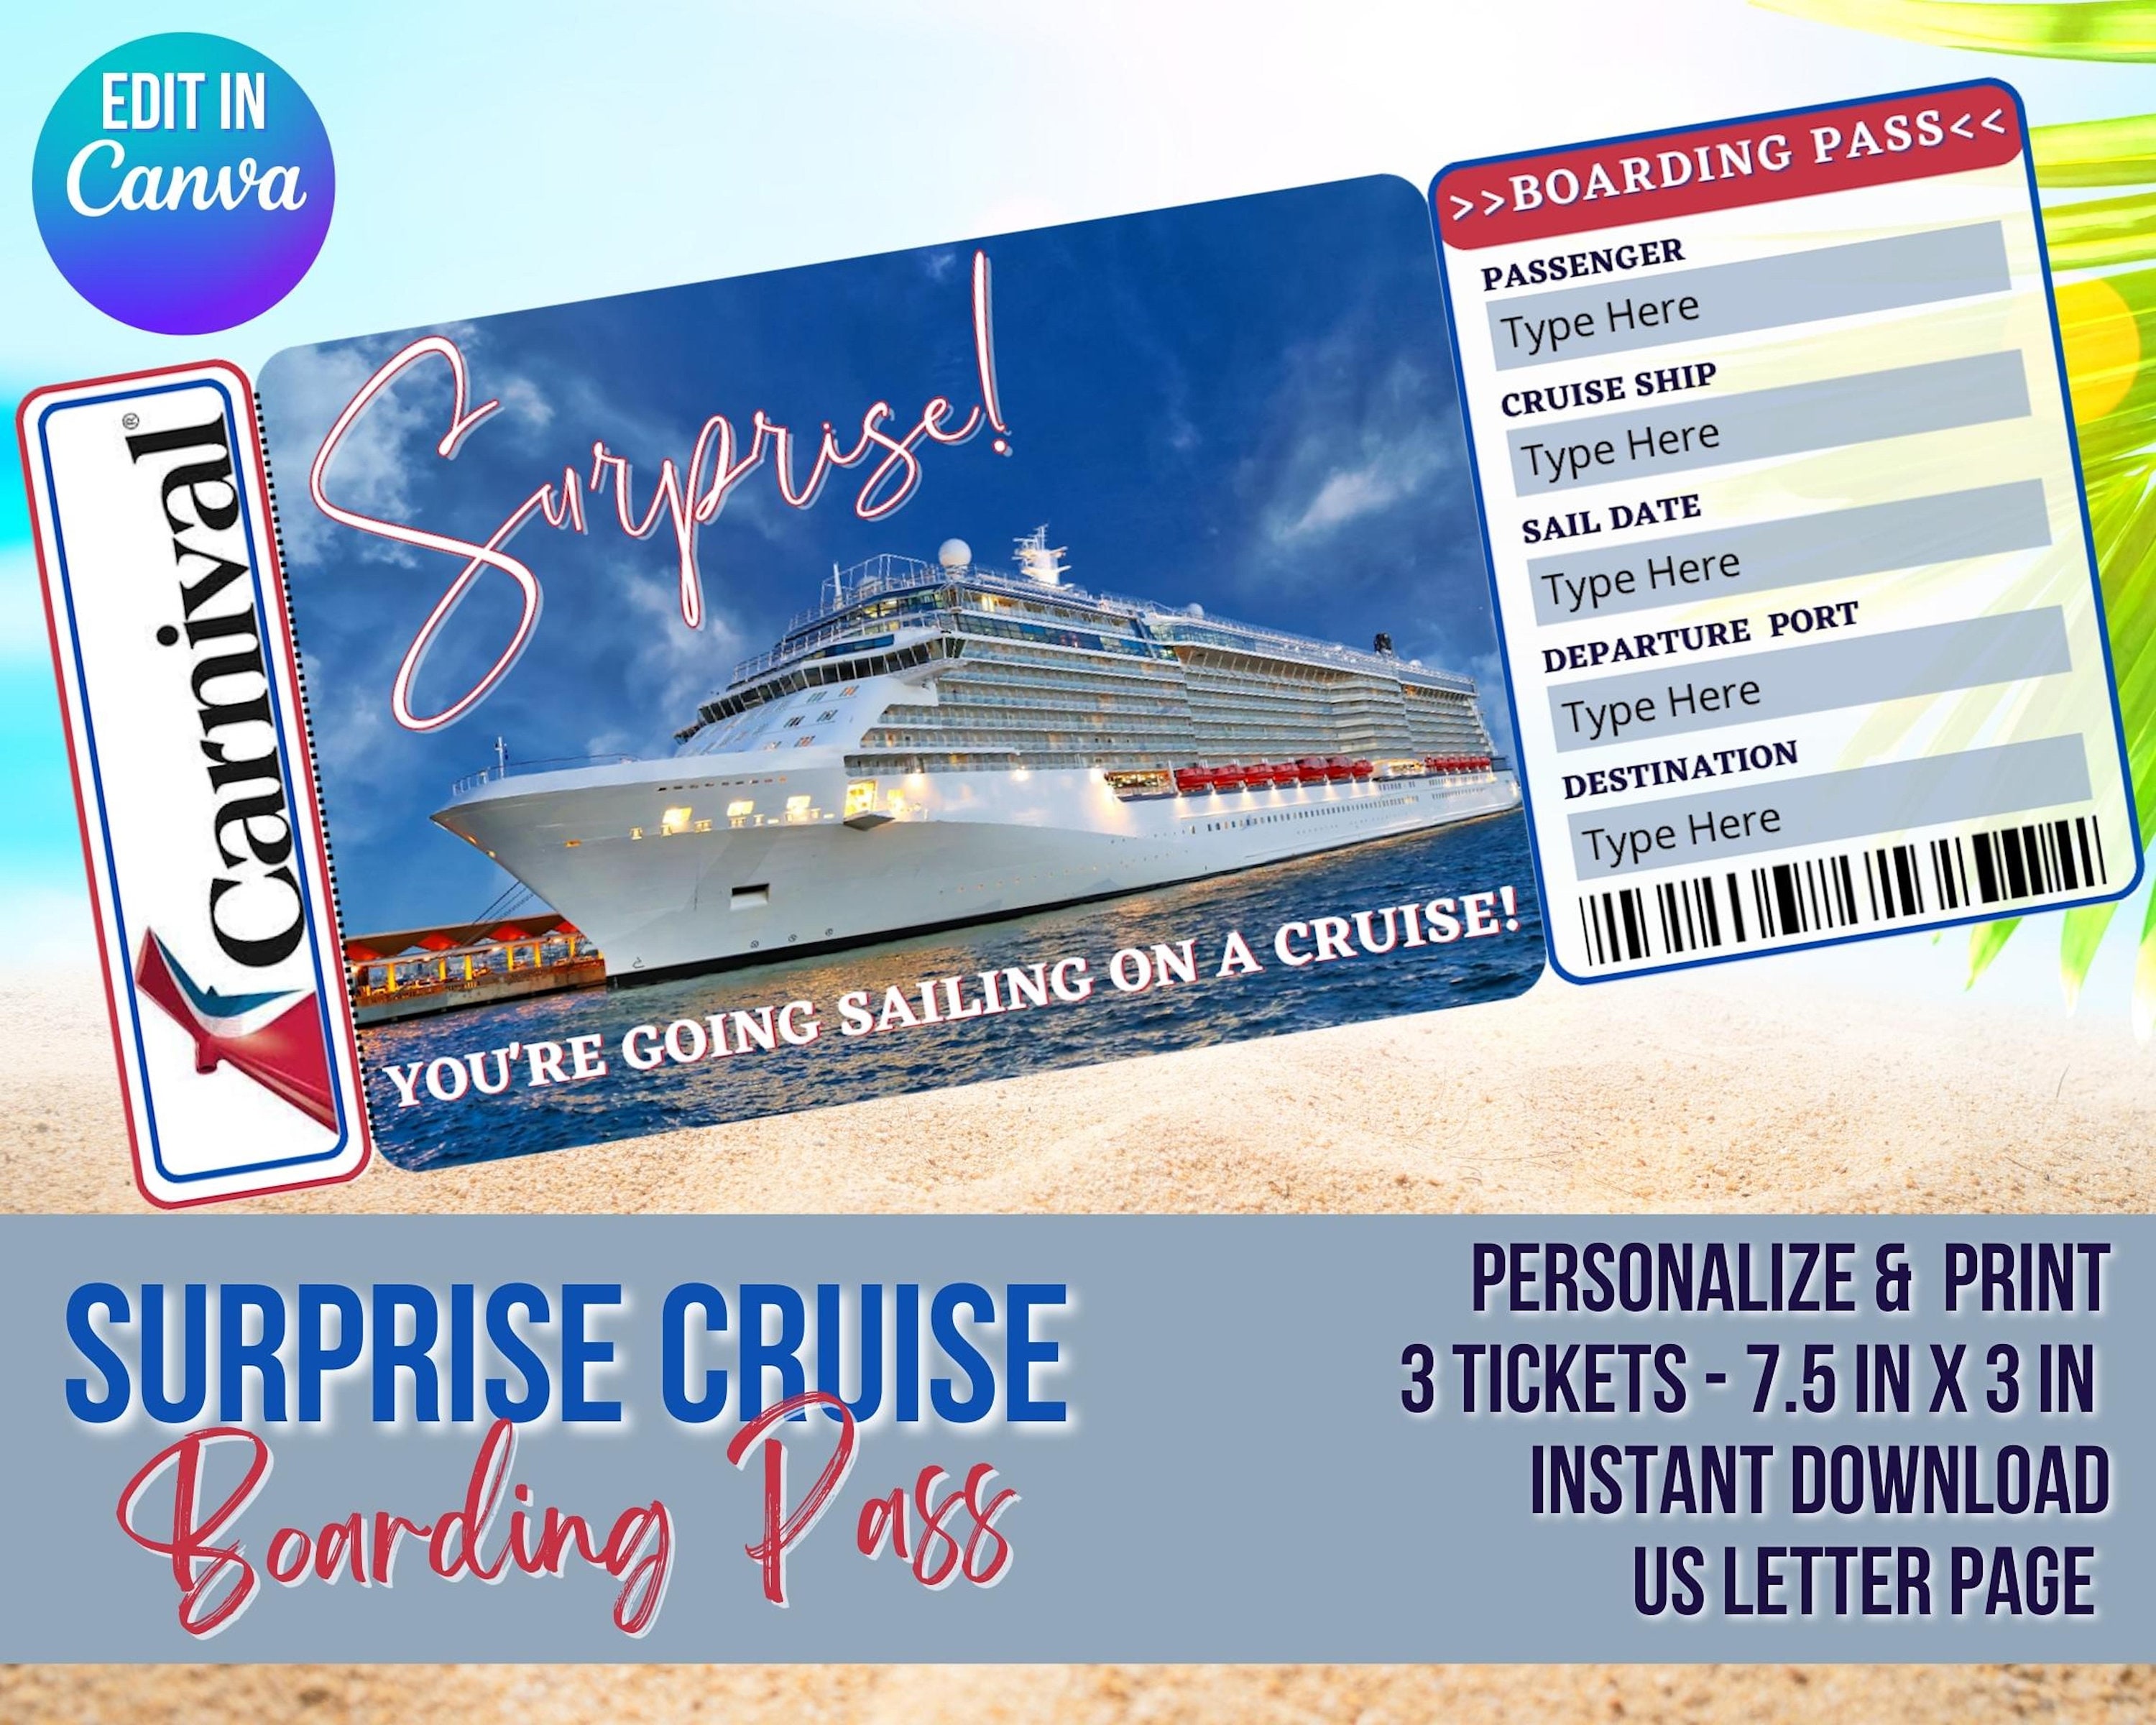 travel pass on cruise ships